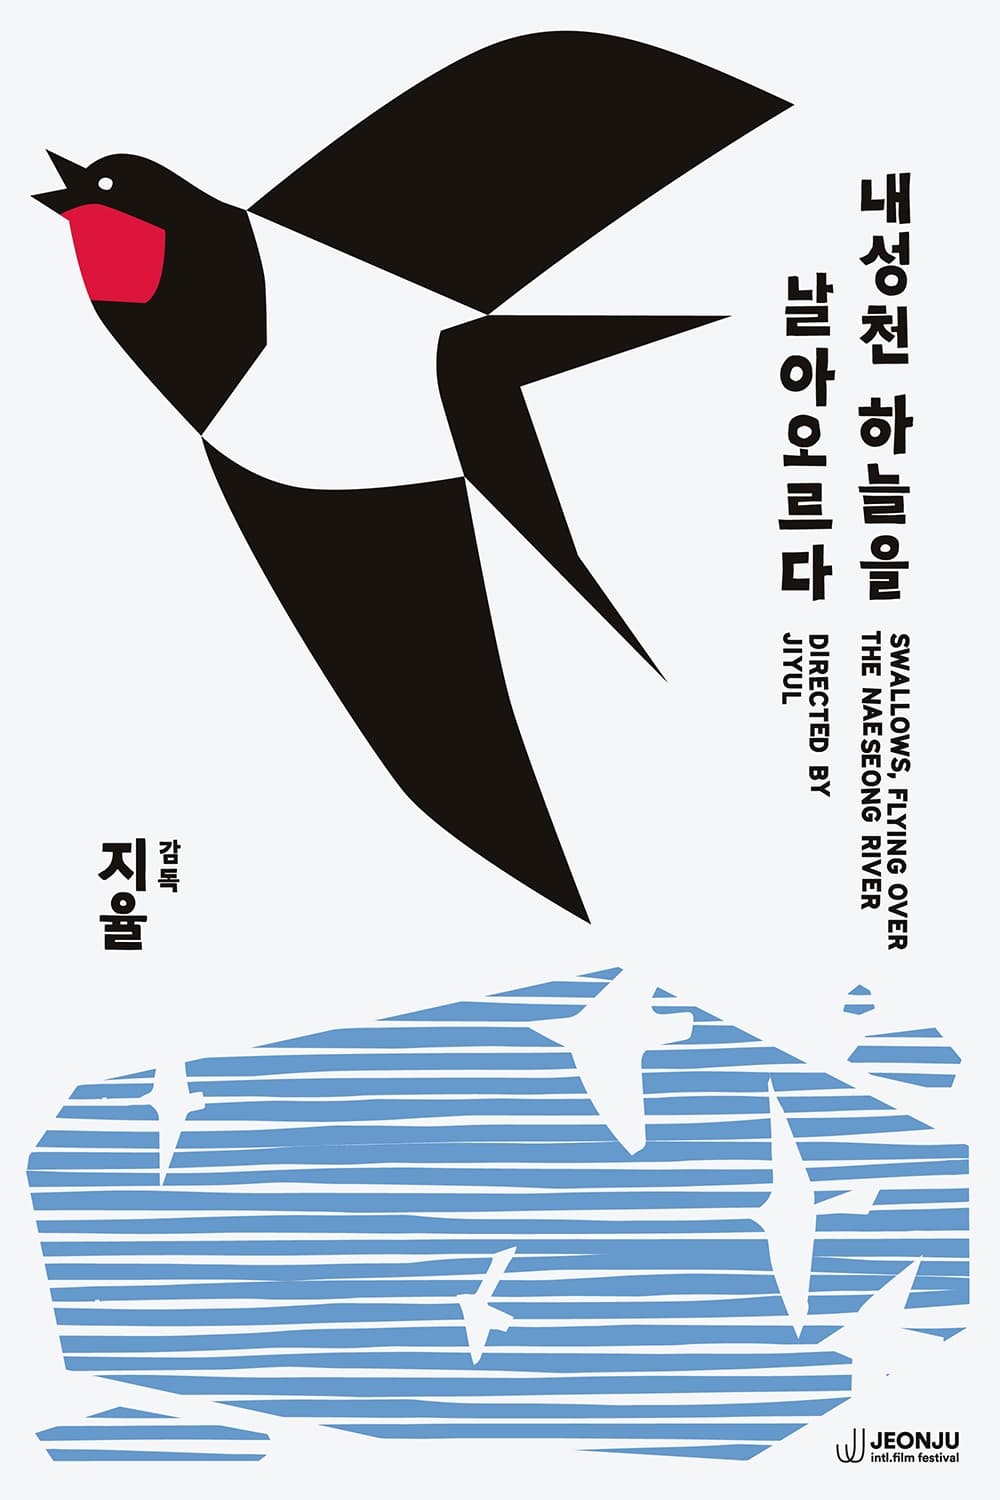 Swallows, flying over the Naeseong River